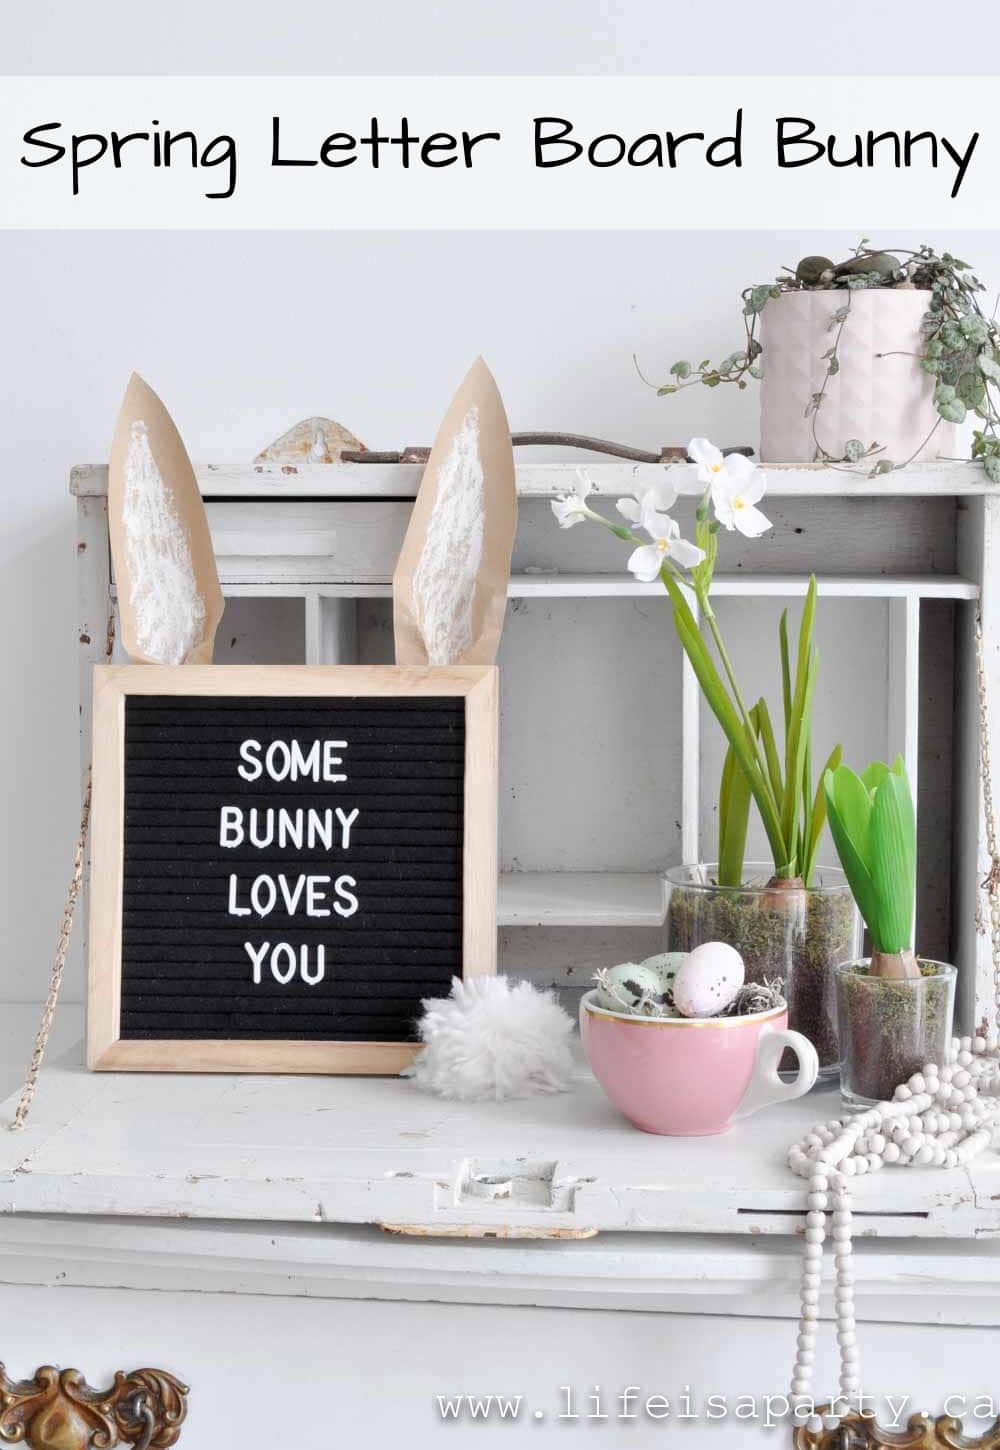 Spring Letter Board Bunny: If you're looking for spring letter board ideas you'll love this. Non-permenant bunny ears and a tail are perfect for spring.